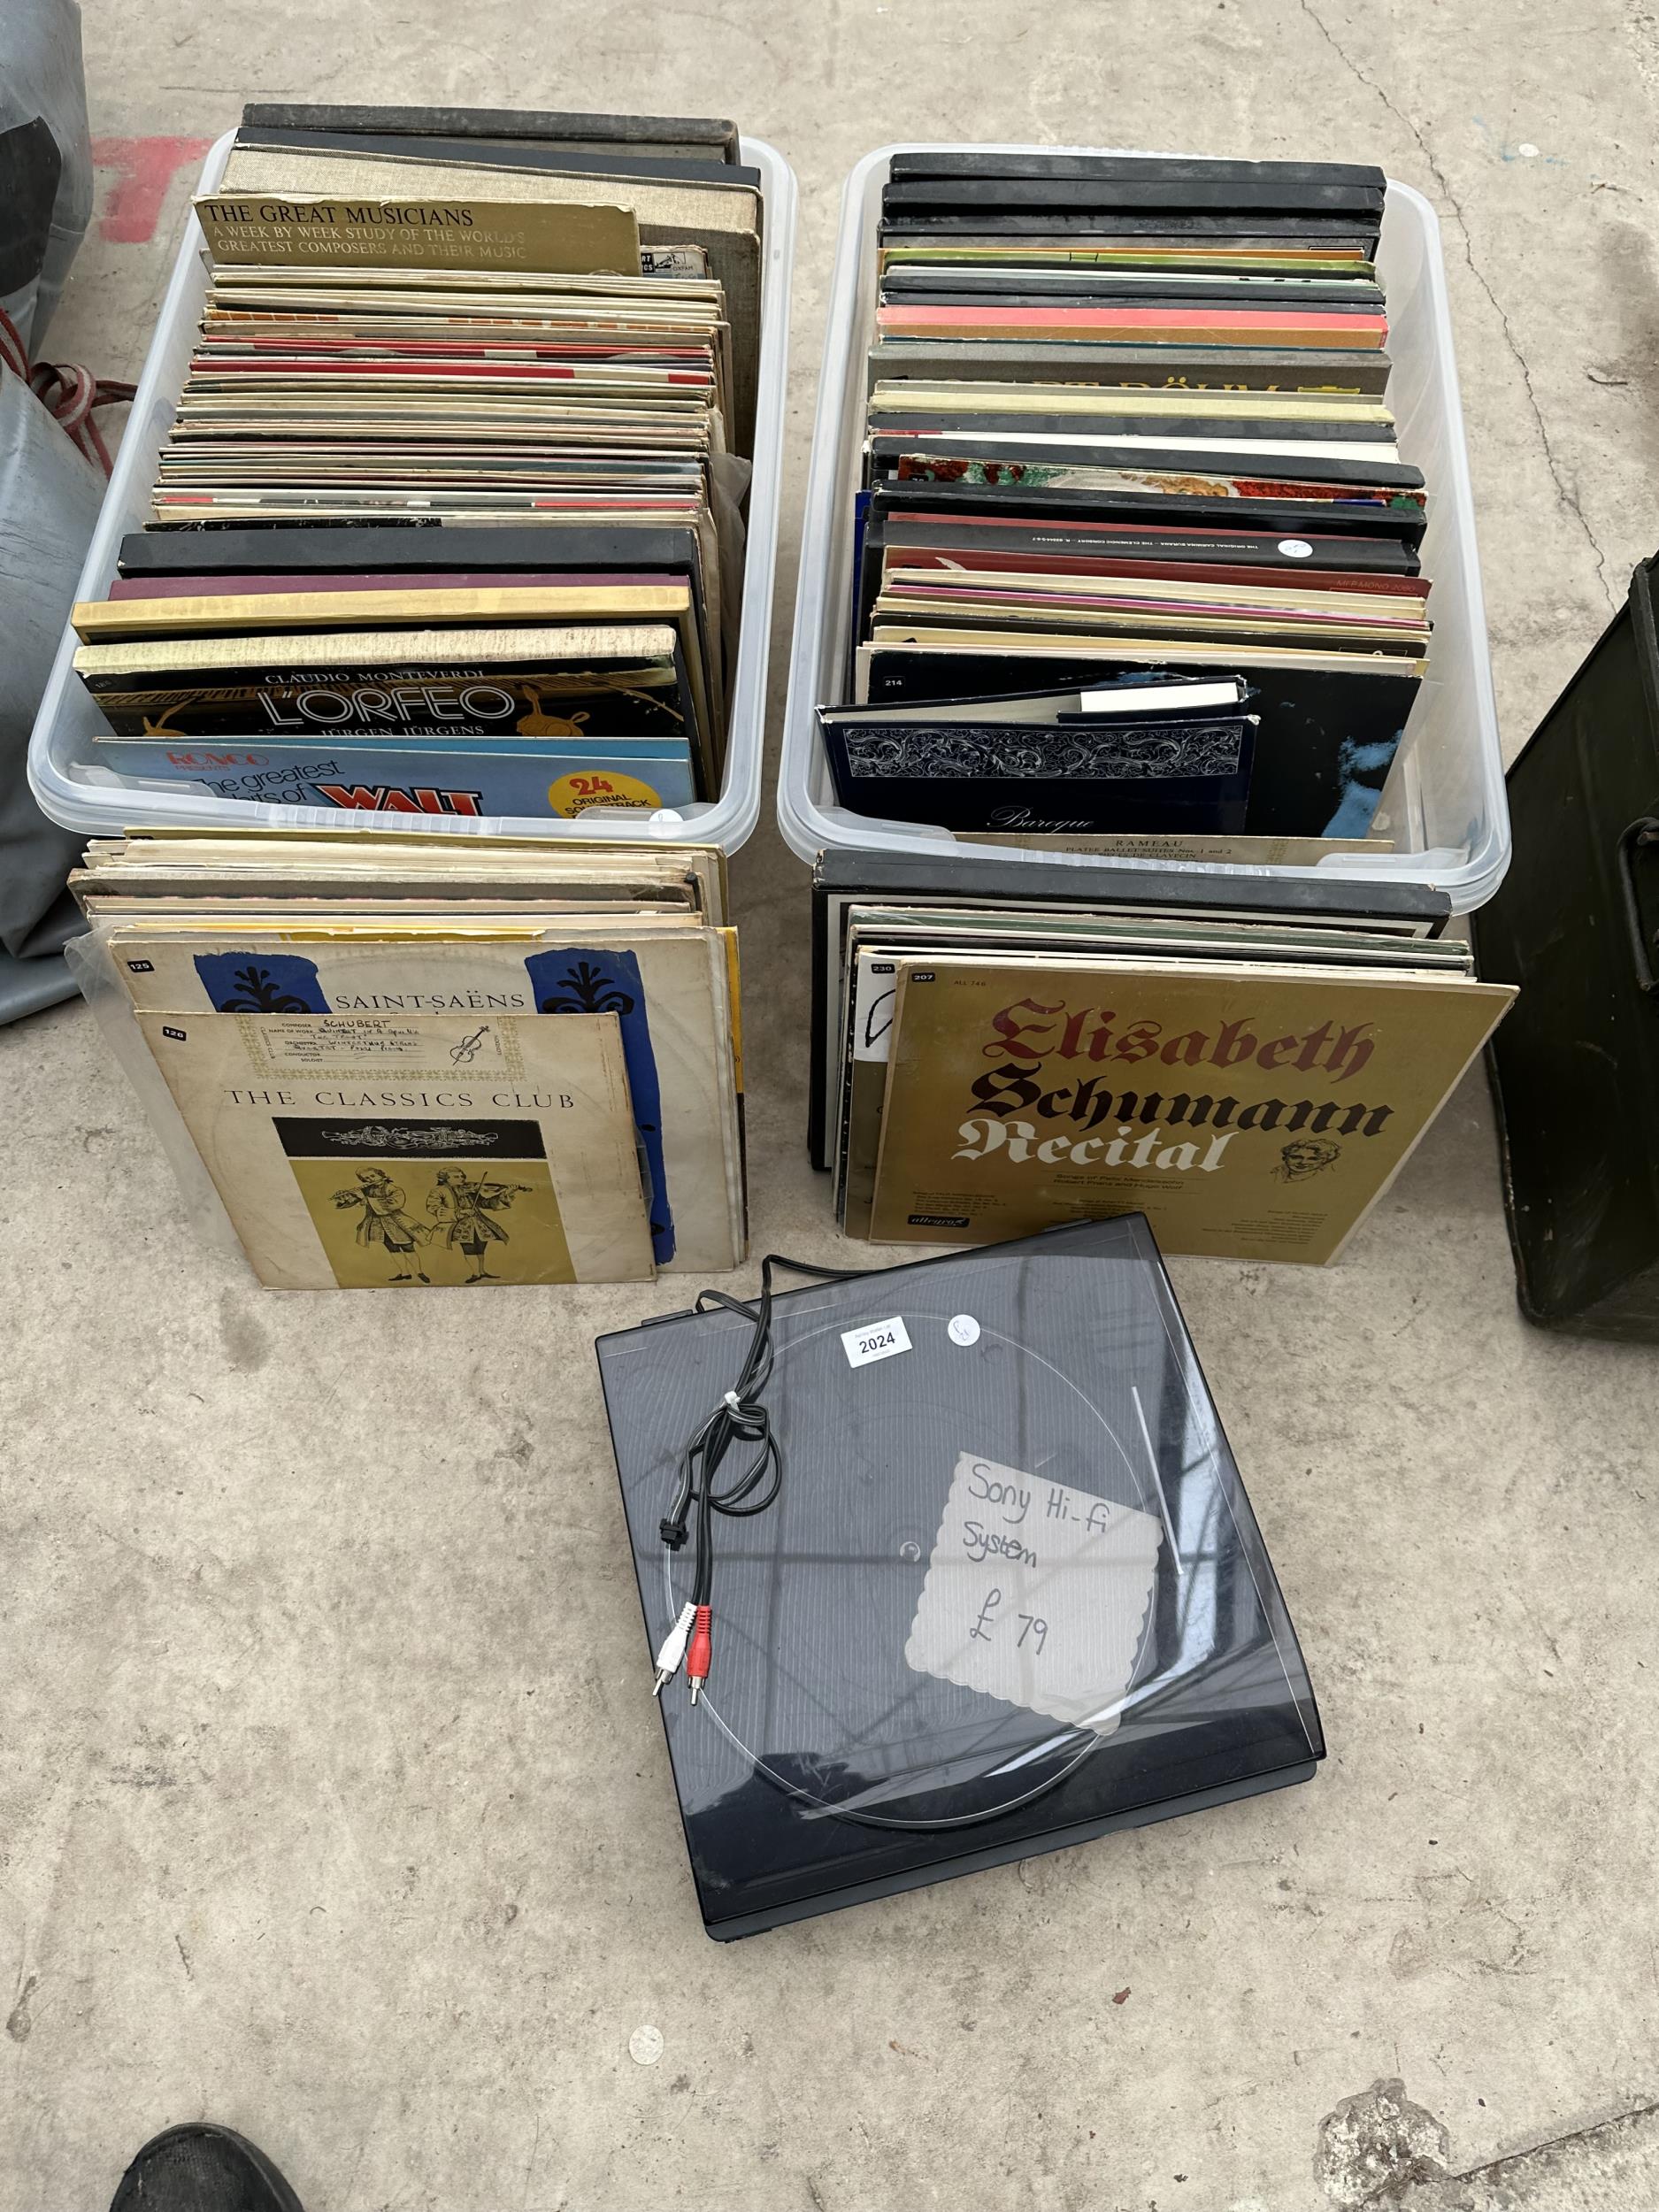 AN ASSORTMENT OF LP RECORDS AND A RECORD PLAYER